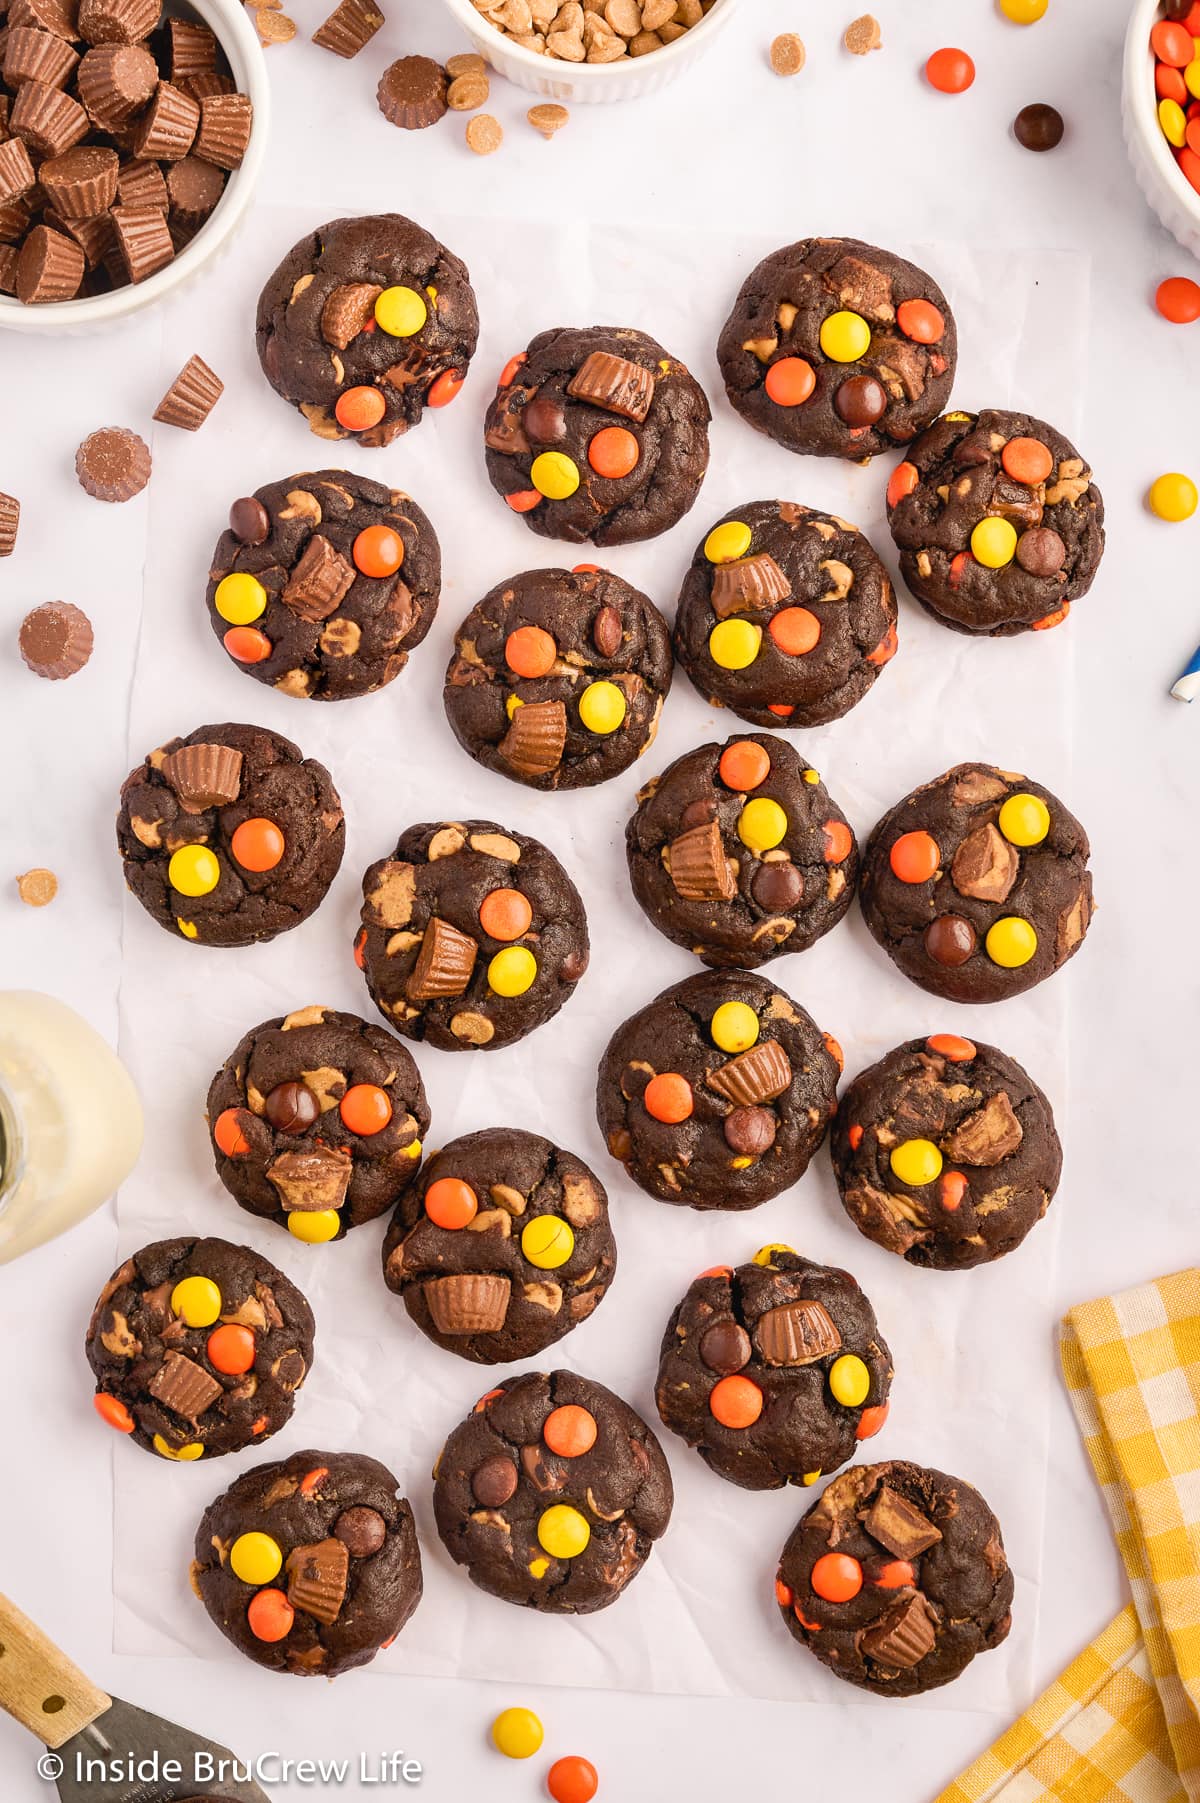 Chocolate cookies with candy on a white paper.